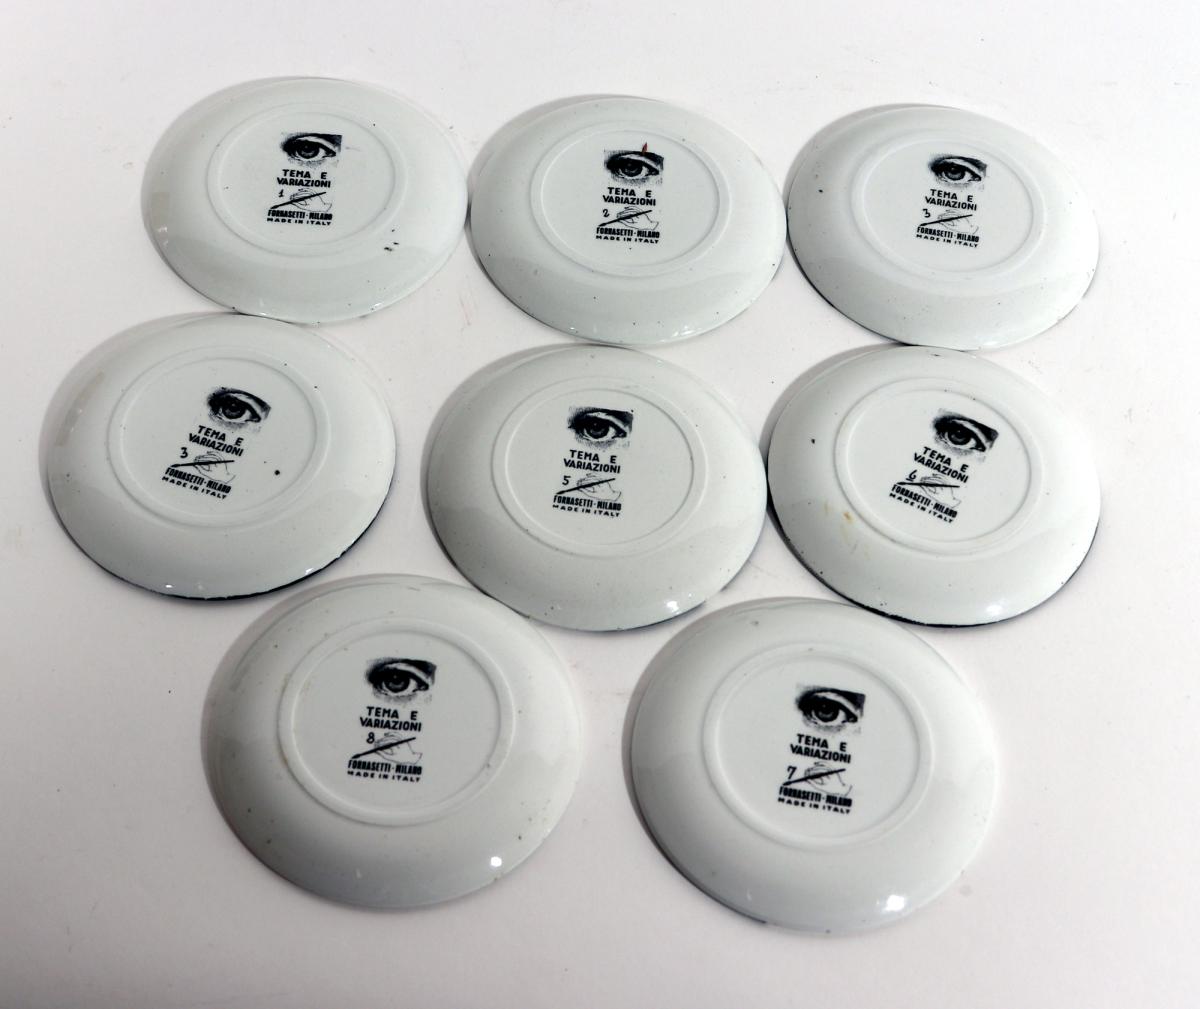 Early Set of Piero Fornasetti Eight Themes & Variations Coasters with Original Gold Box, "Tema E Variazioni", 1960s